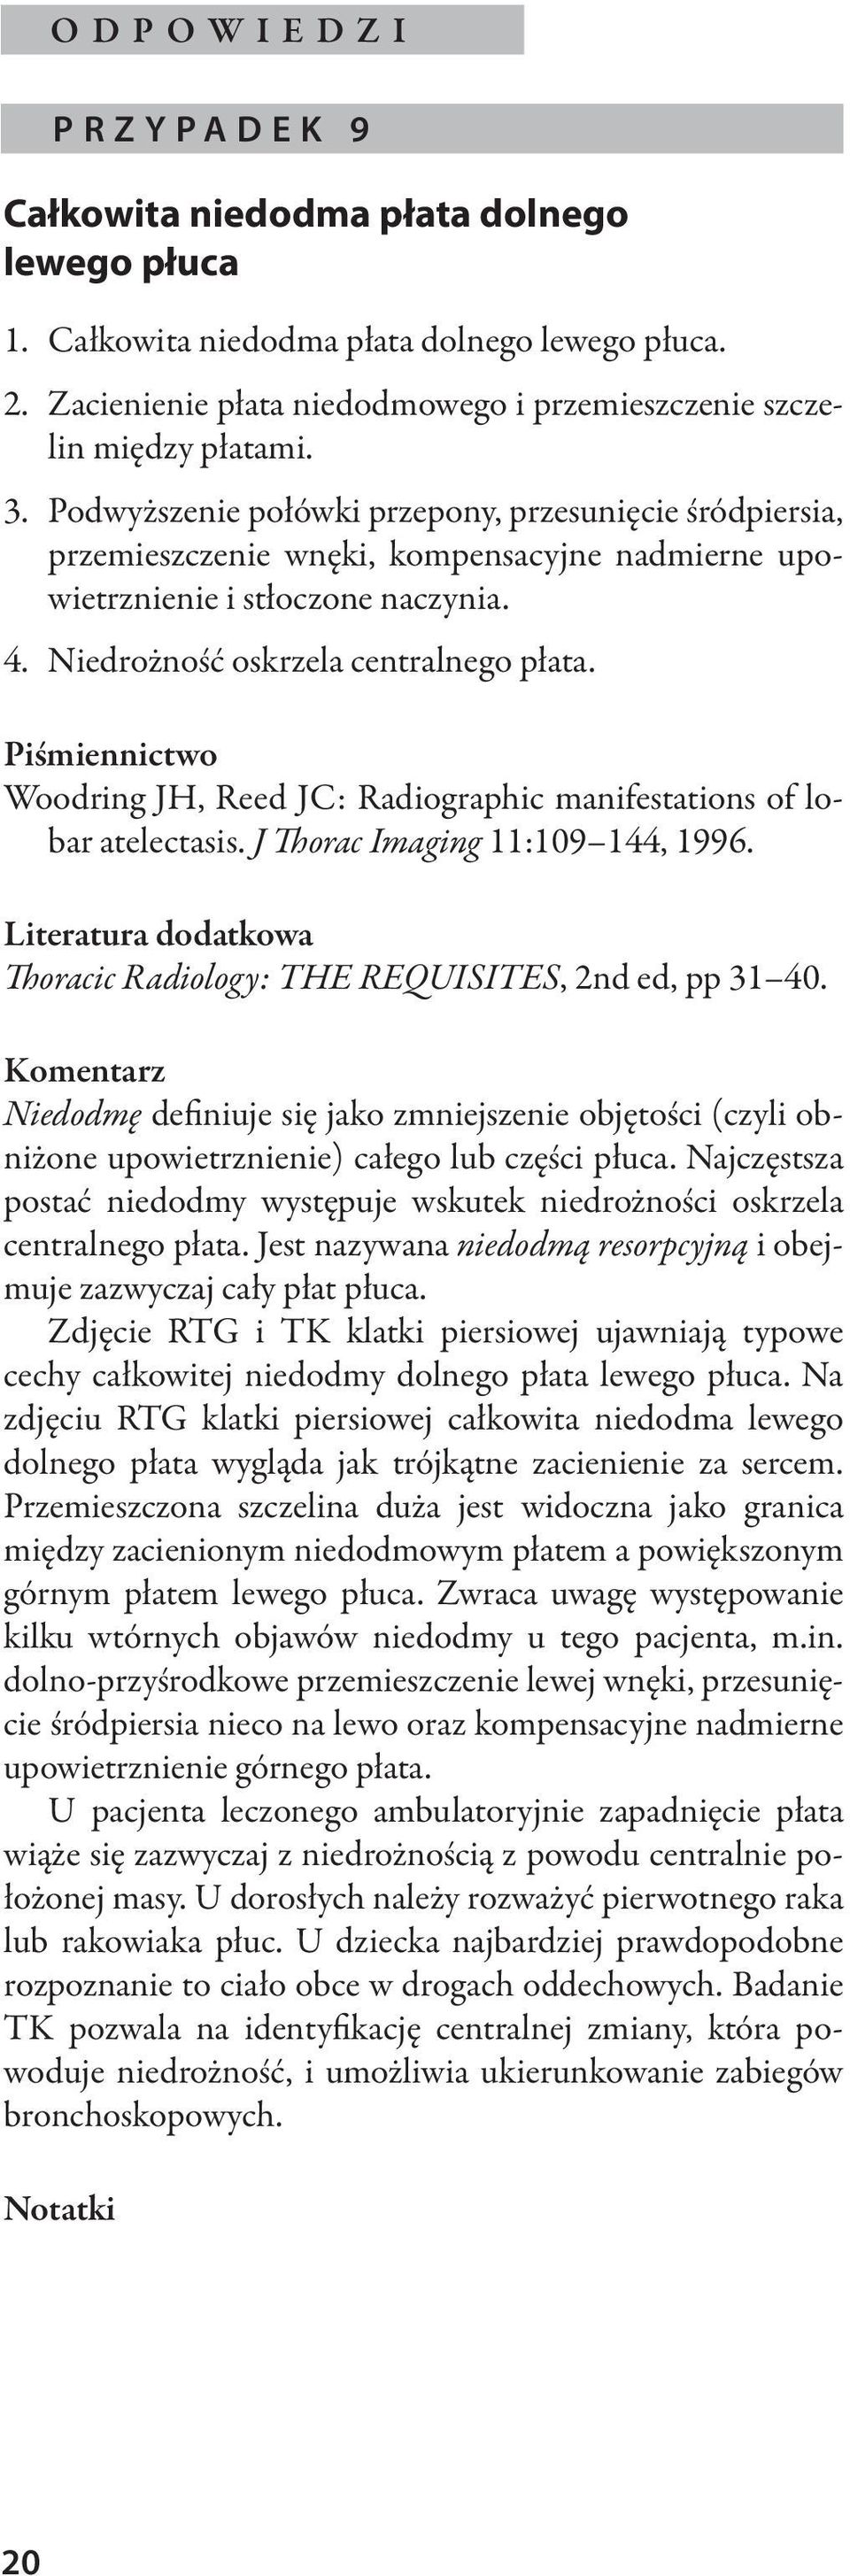 Piśmiennictwo Woodring JH, Reed JC: Radiographic manifestations of lobar atelectasis. J Thorac Imaging 11:109 144, 1996. Literatura dodatkowa Thoracic Radiology: THE REQUISITES, 2nd ed, pp 31 40.